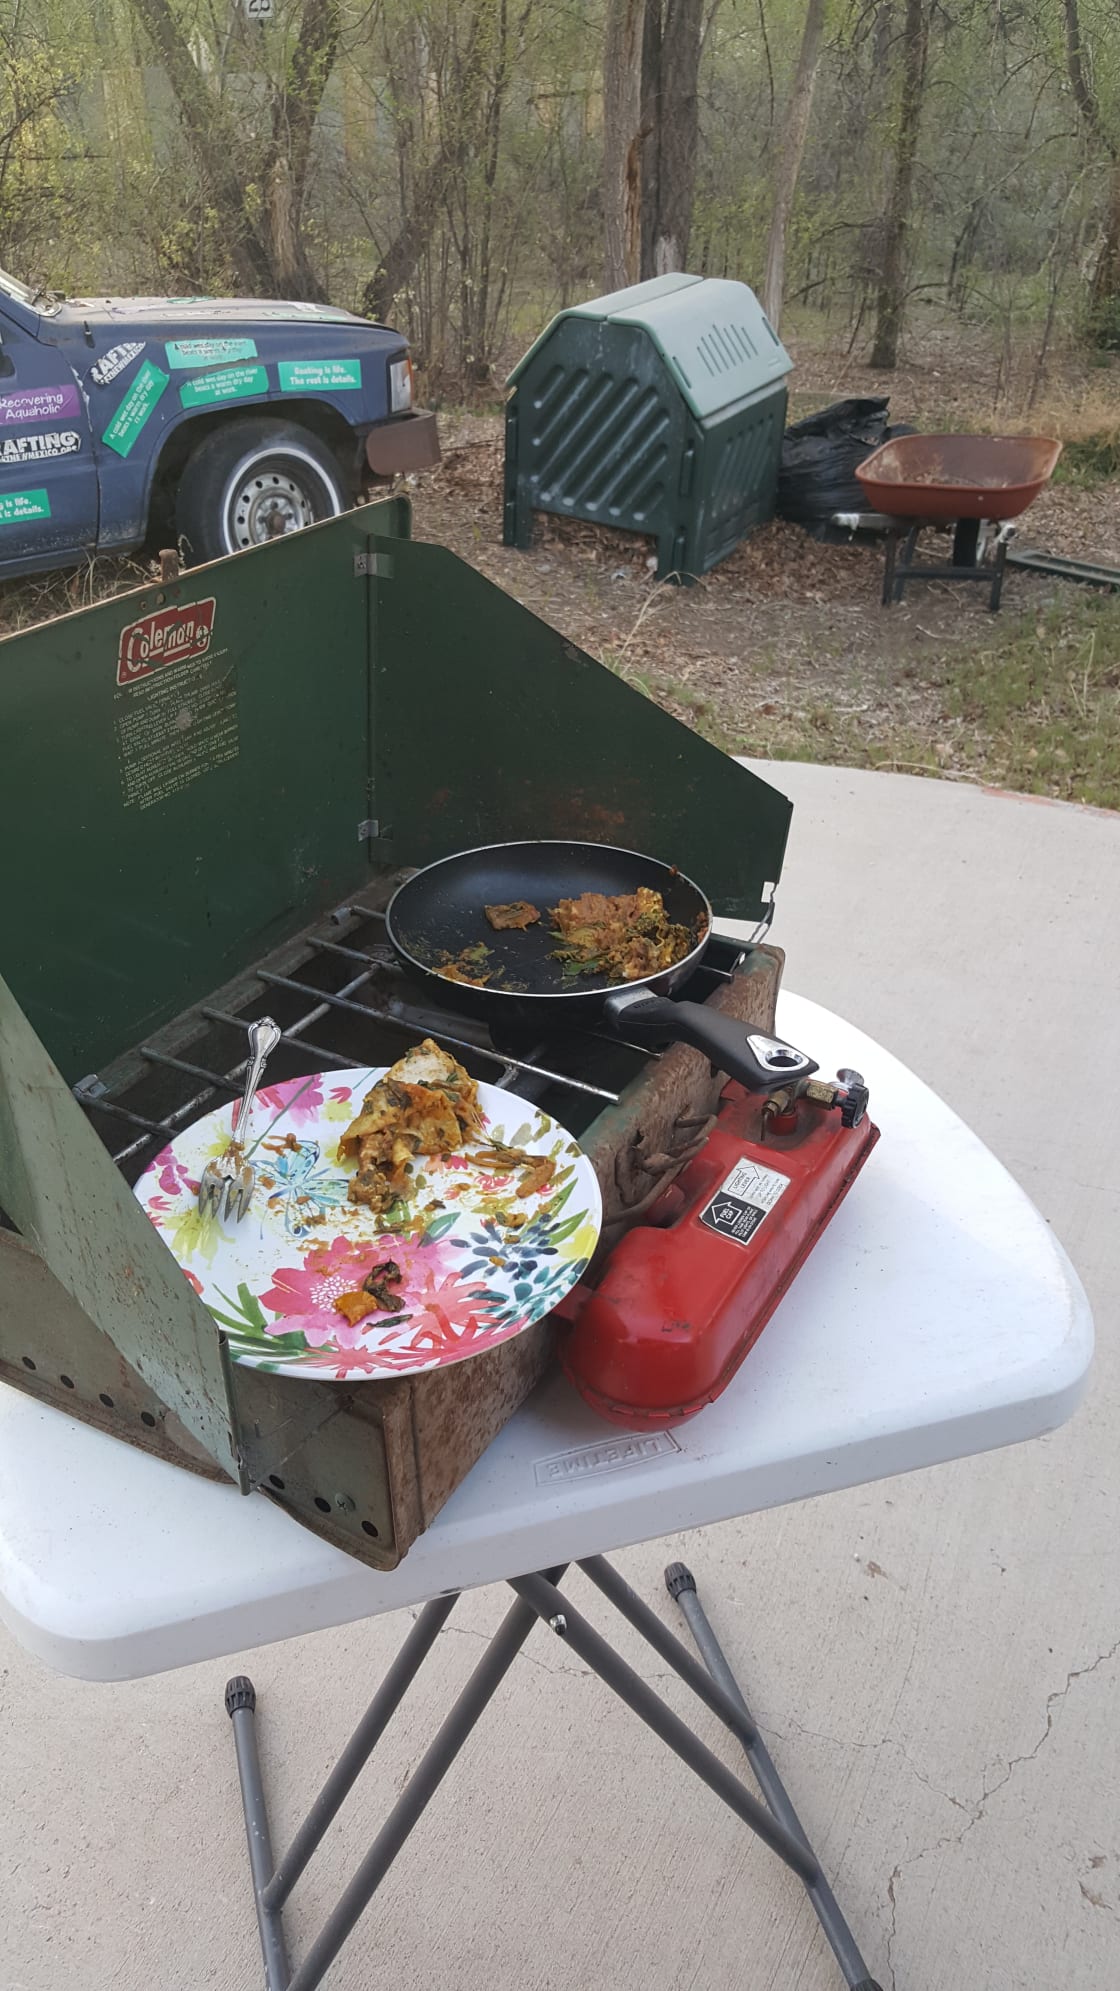 Cooked dinner on old coleman.